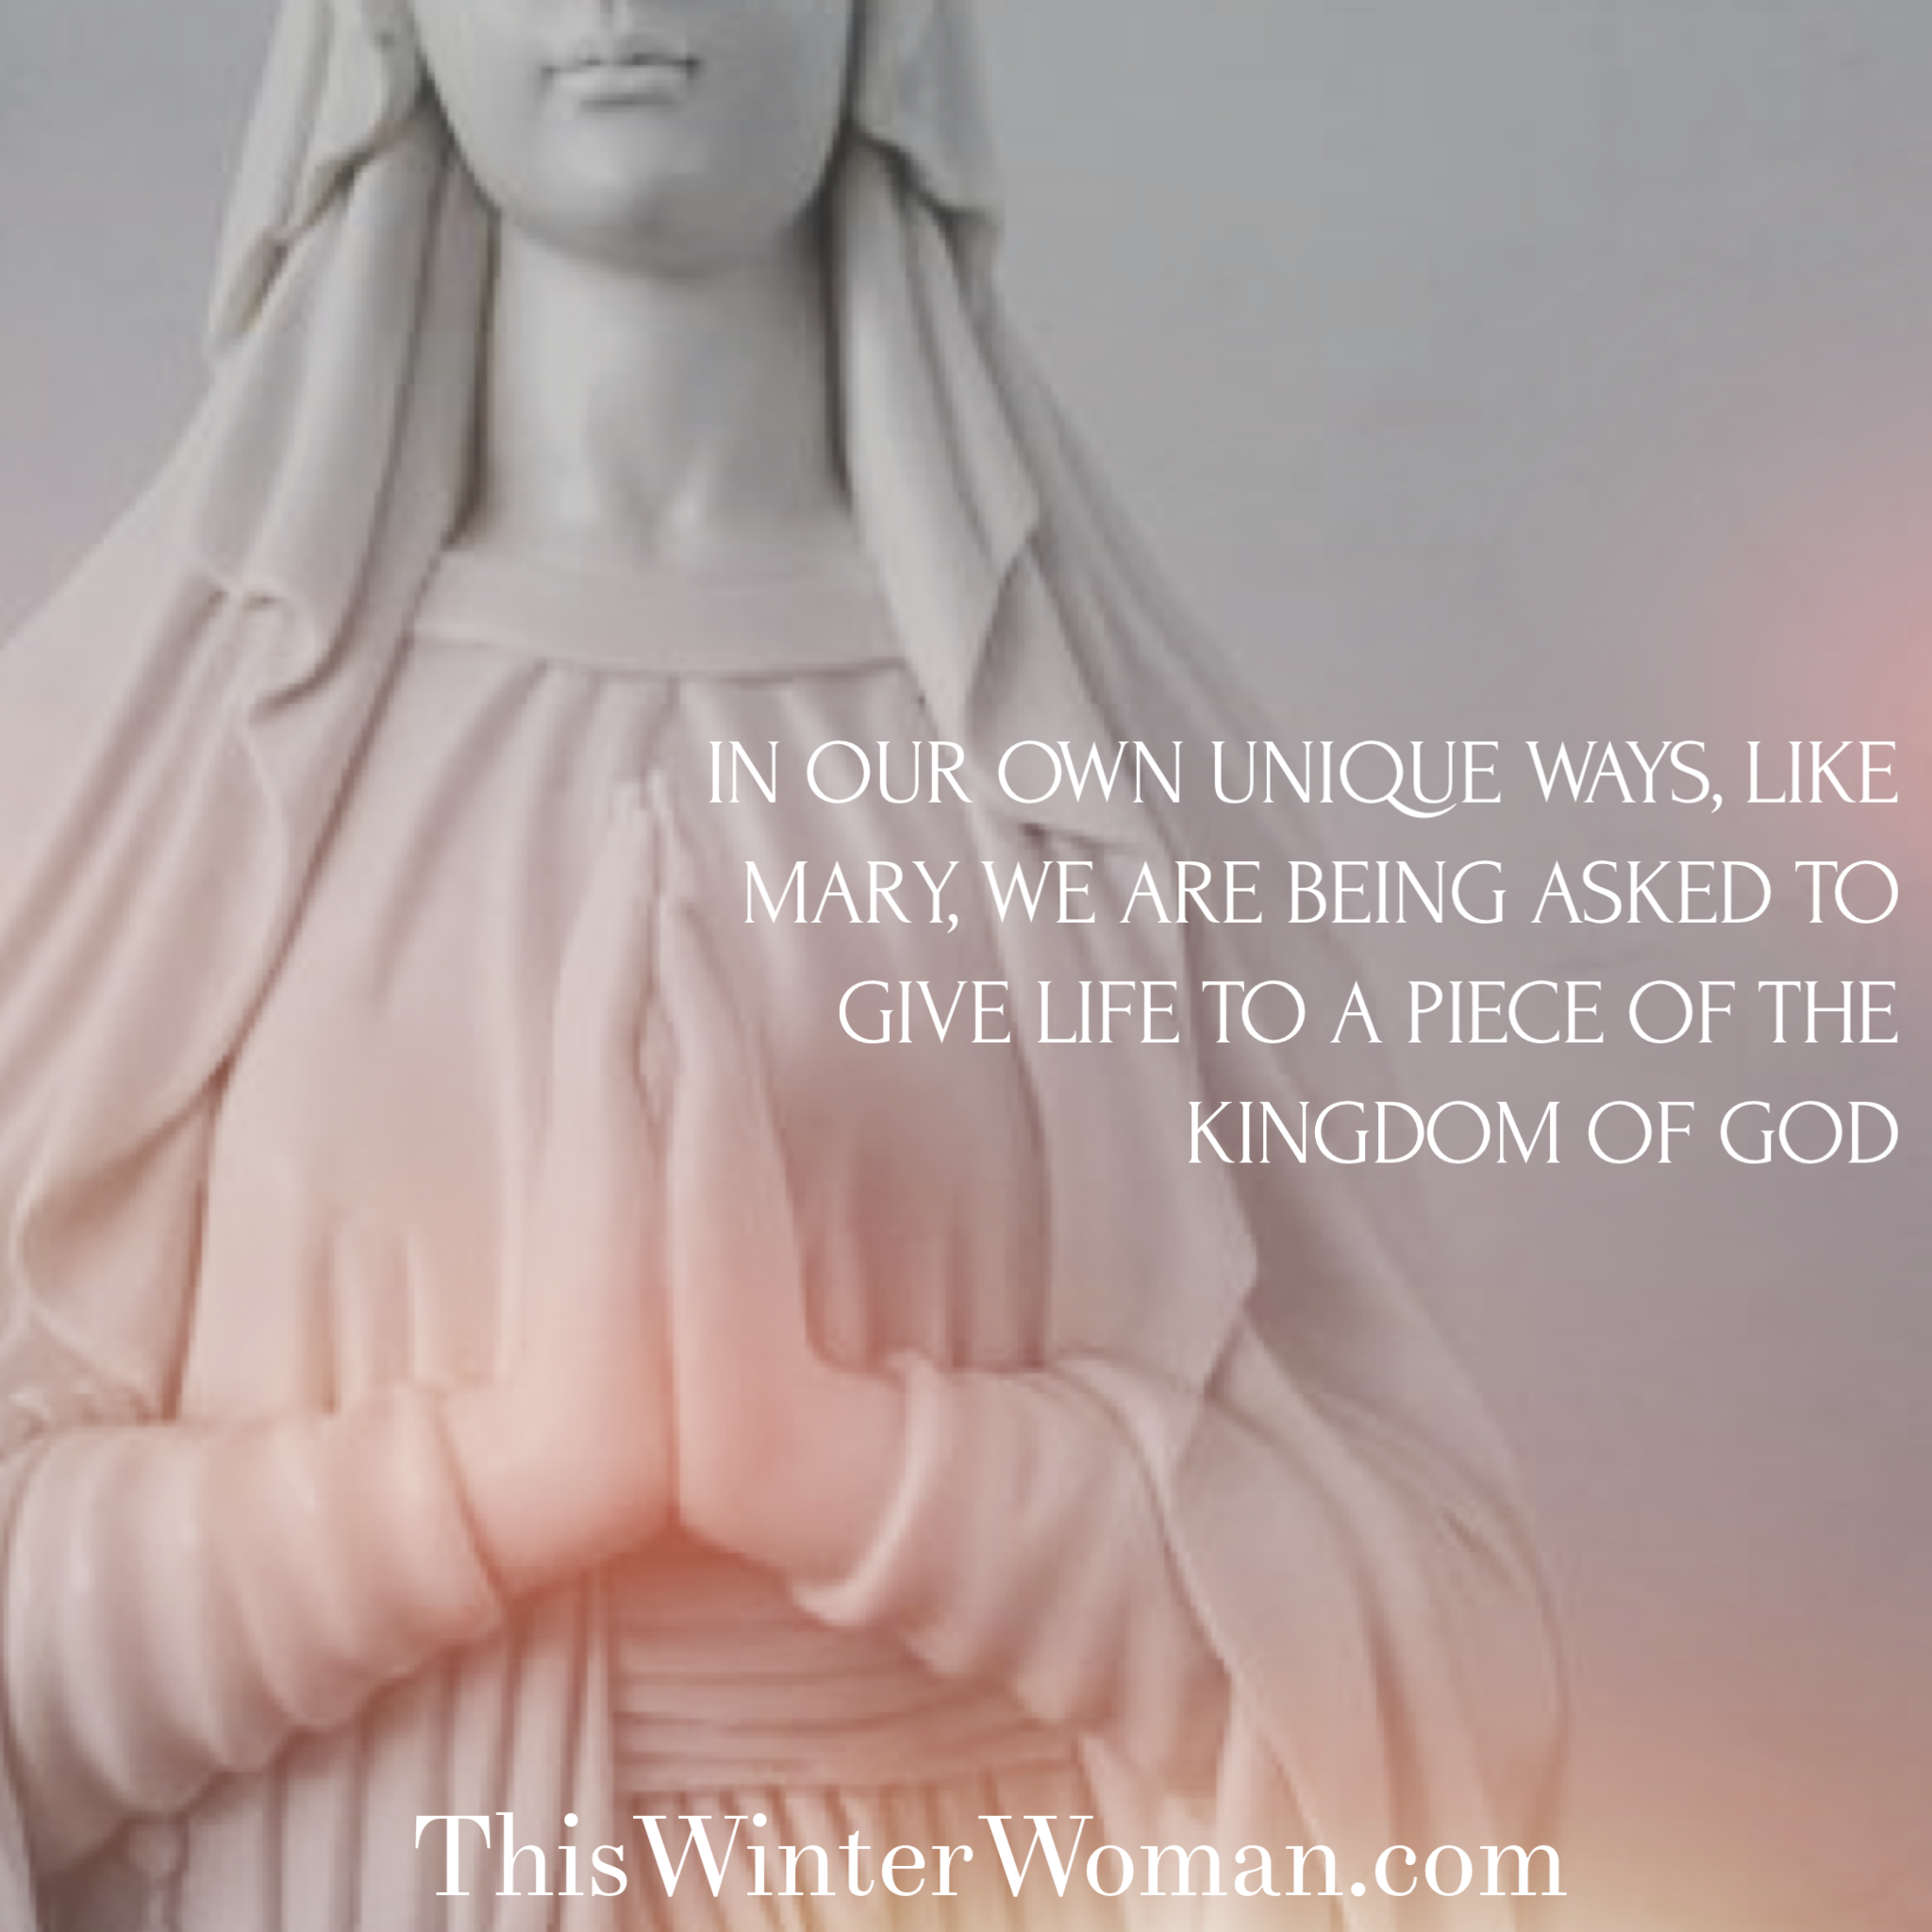 In our own unique ways, like Mary, we are being asked o give life to a piece of the kingdom of God